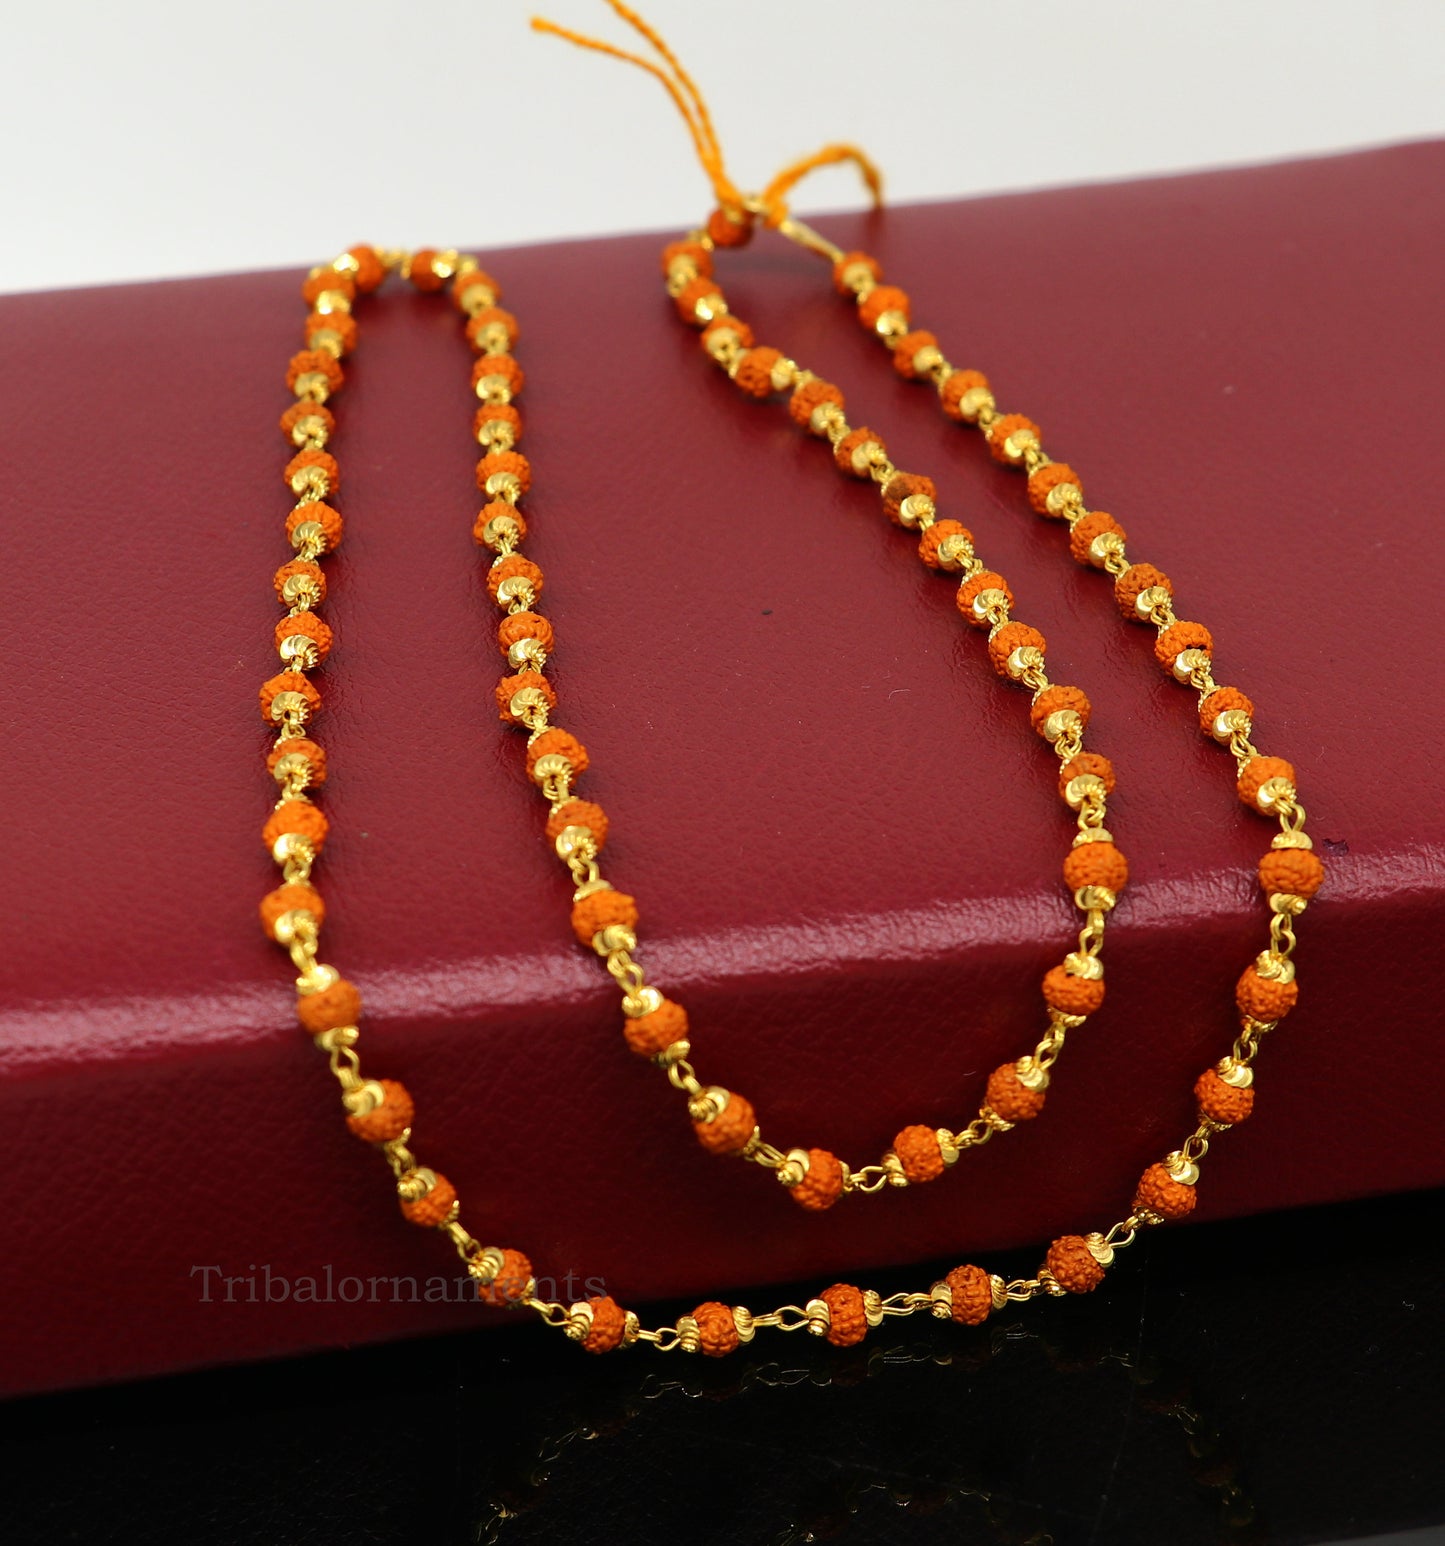 22kt yellow gold hallmarked 4 mm rudraksha chain necklace, Gorgeous design customized beaded chain, excellent wedding gifting jewelry ch262 - TRIBAL ORNAMENTS